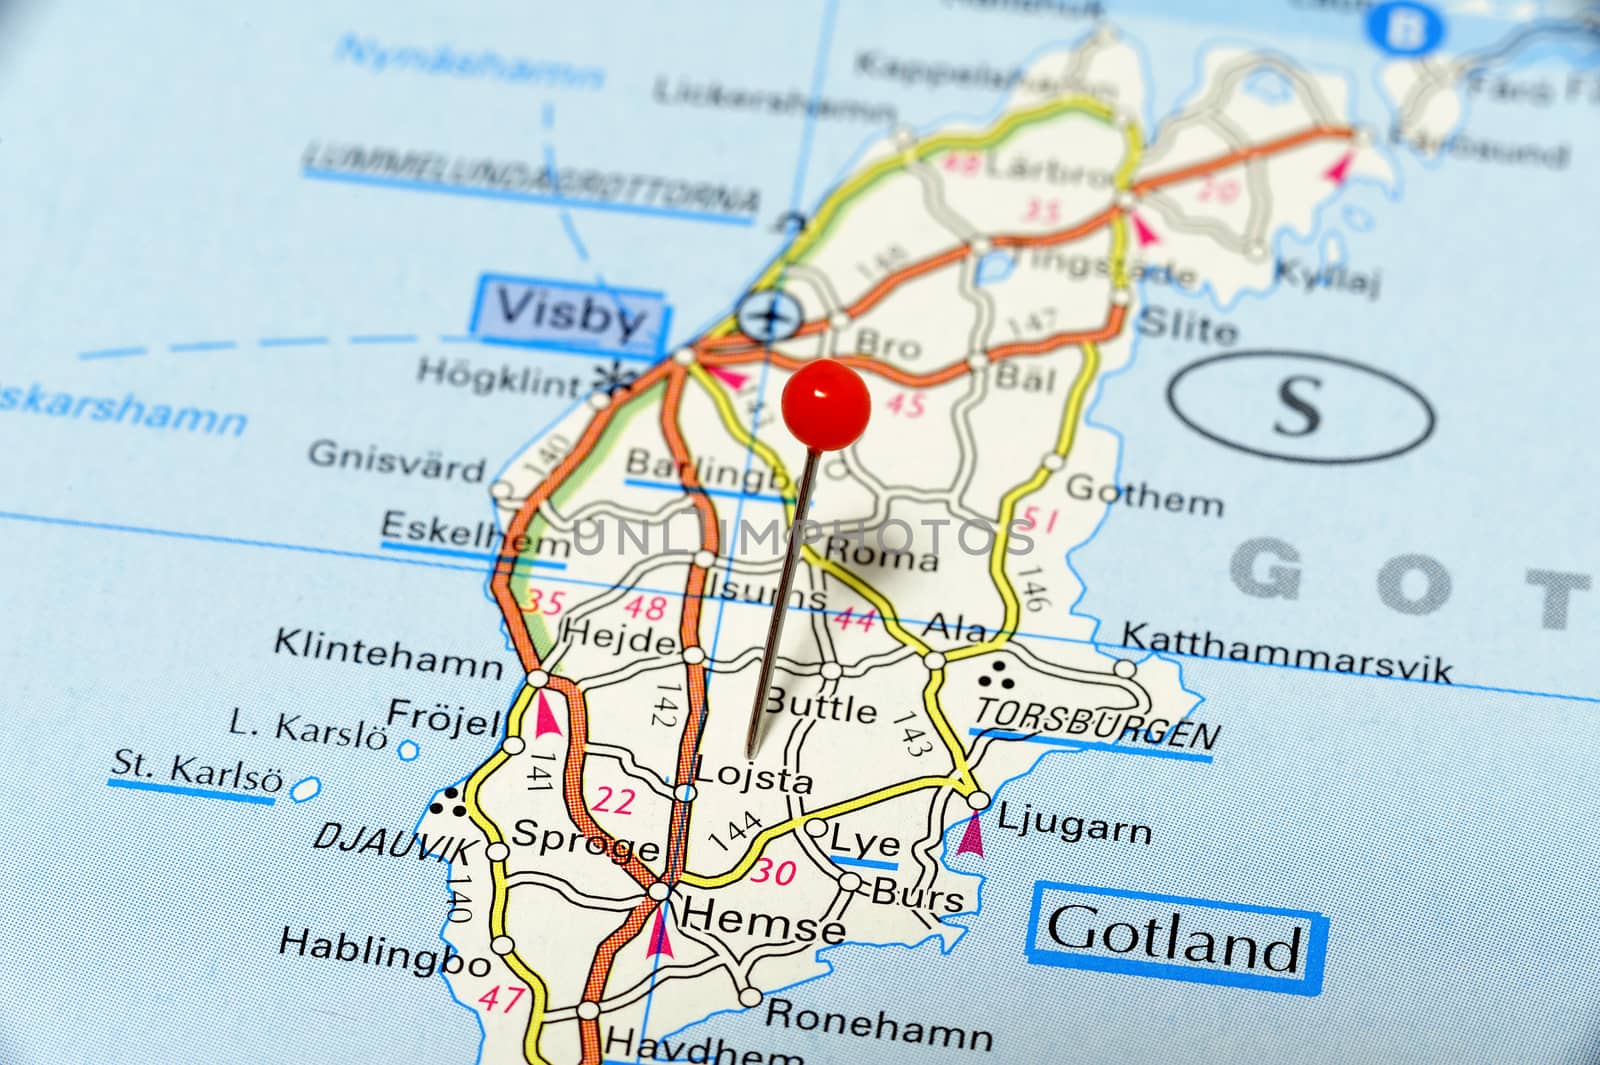 Closeup map of Gotland. Gotland is the largest iceland in Sweden.